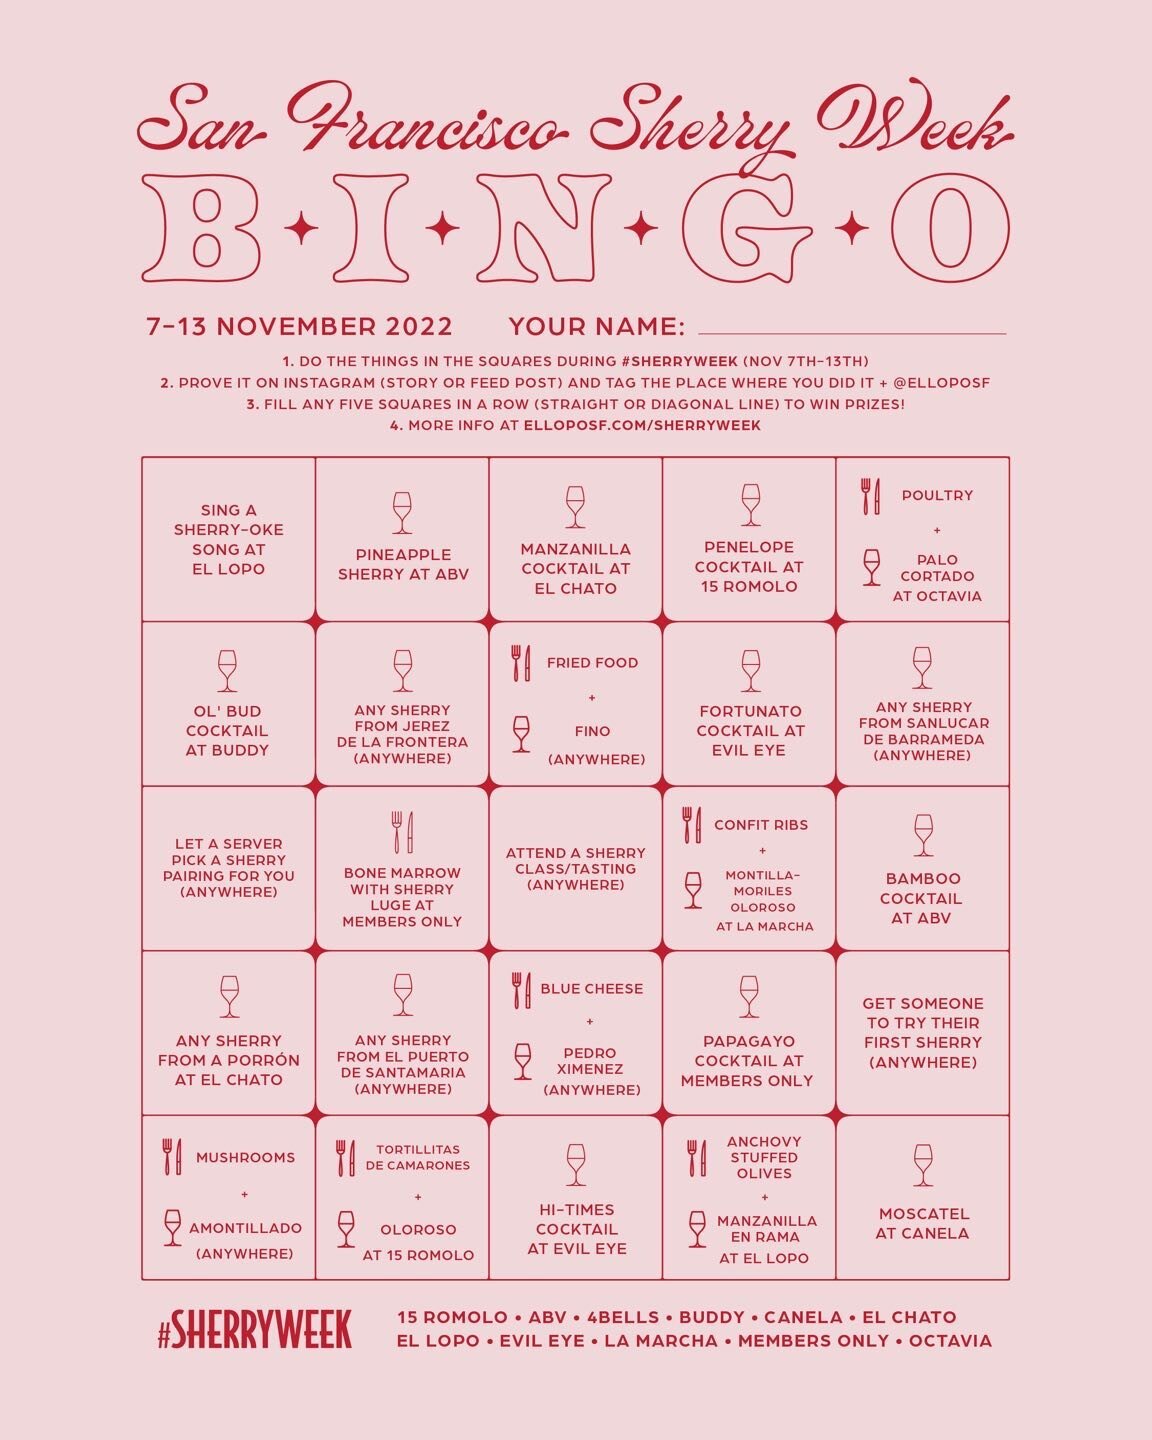 It&rsquo;s Sherry Week and we are excited to be playing Bingo with some of our favorite spots in the City! Come sip on some delicious Sherry cocktails, have fun, win prizes! #sherryweek